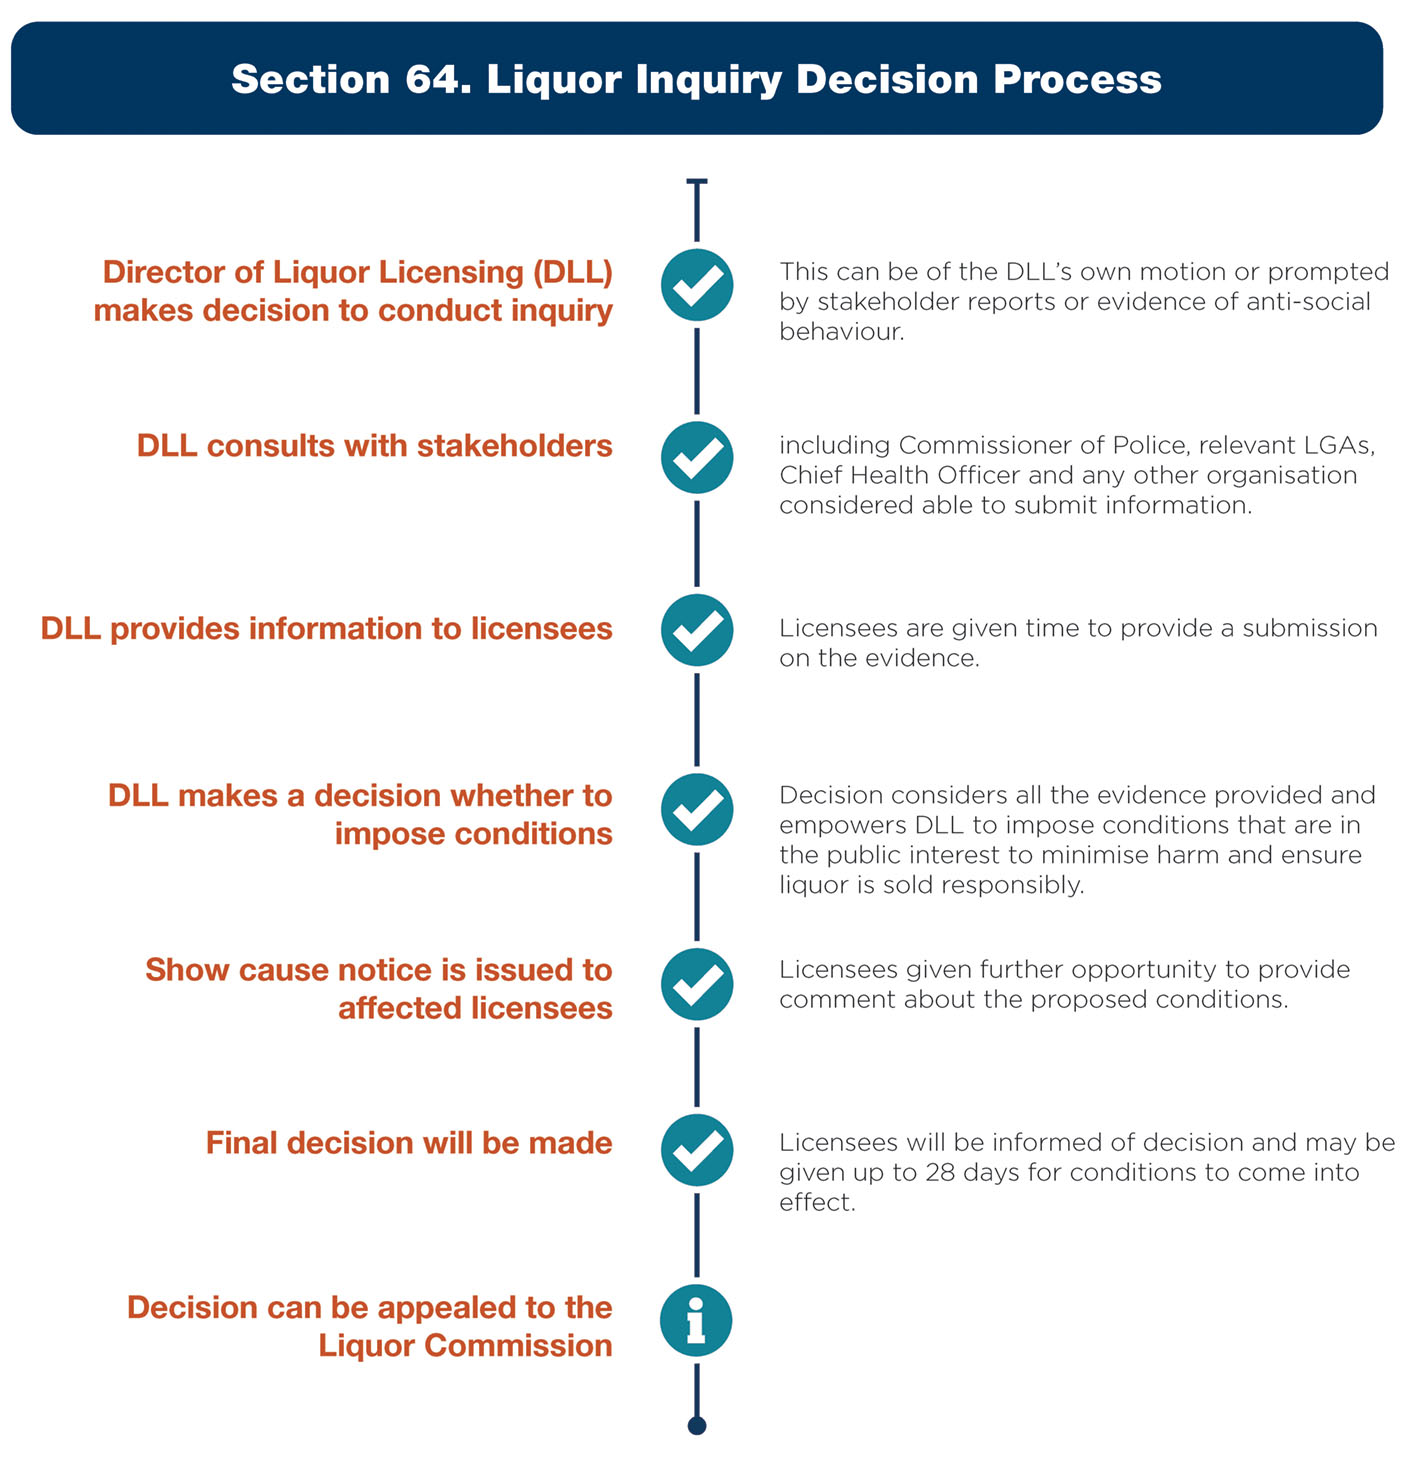 A visual representation of the process decision list as outlined in the list below.